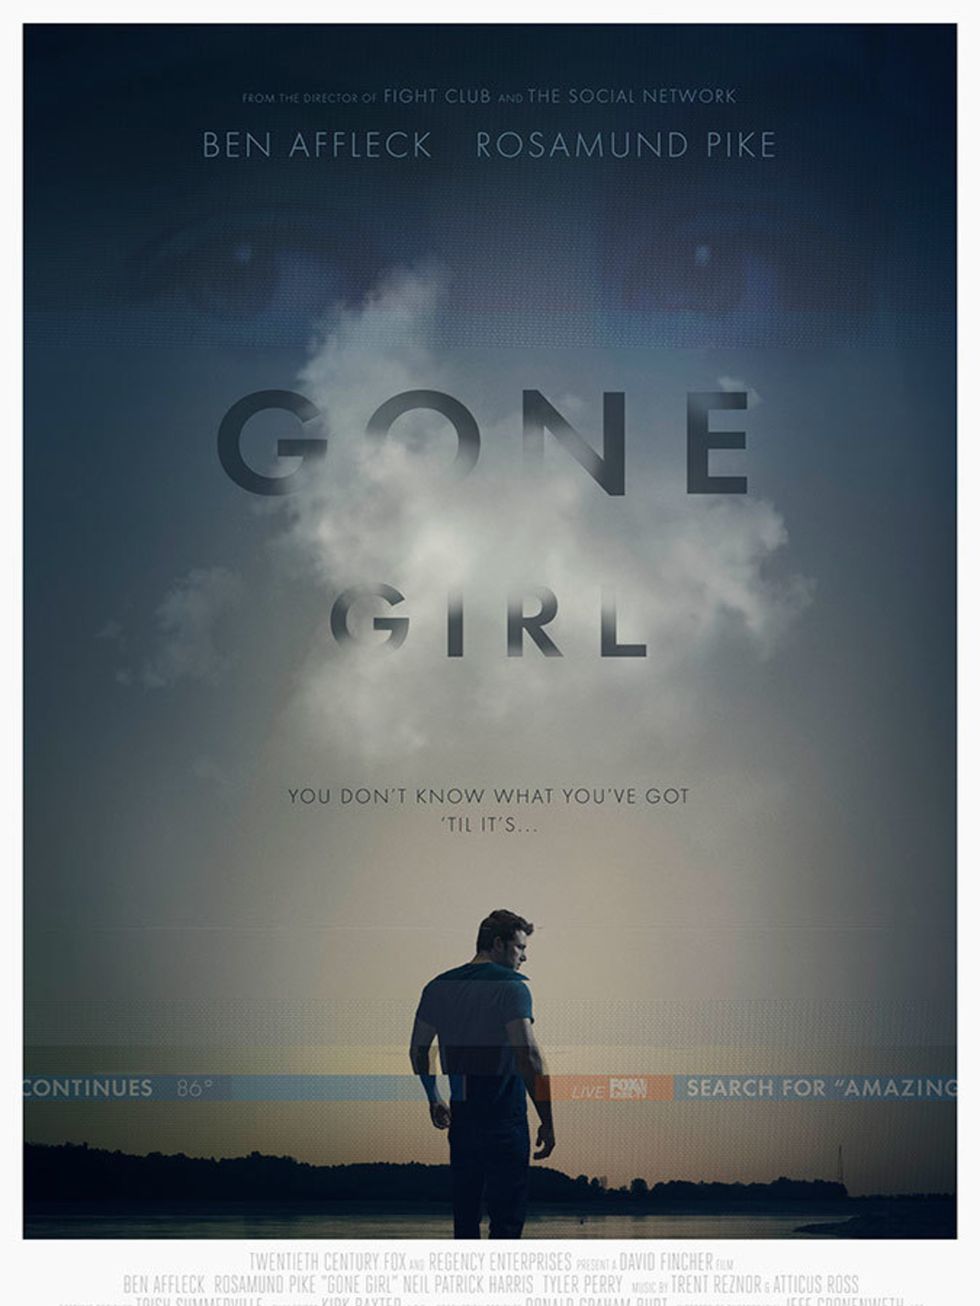 <p><strong>FILM  Gone Girl </strong></p>

<p>Adapted from the popular novel by Gillian Flynn, get wrapped up in the highly anticipated film version of Gone Girl.</p>

<p>When Amy Dunne goes missing, suspected dead on the day of her fifth wedding annivers